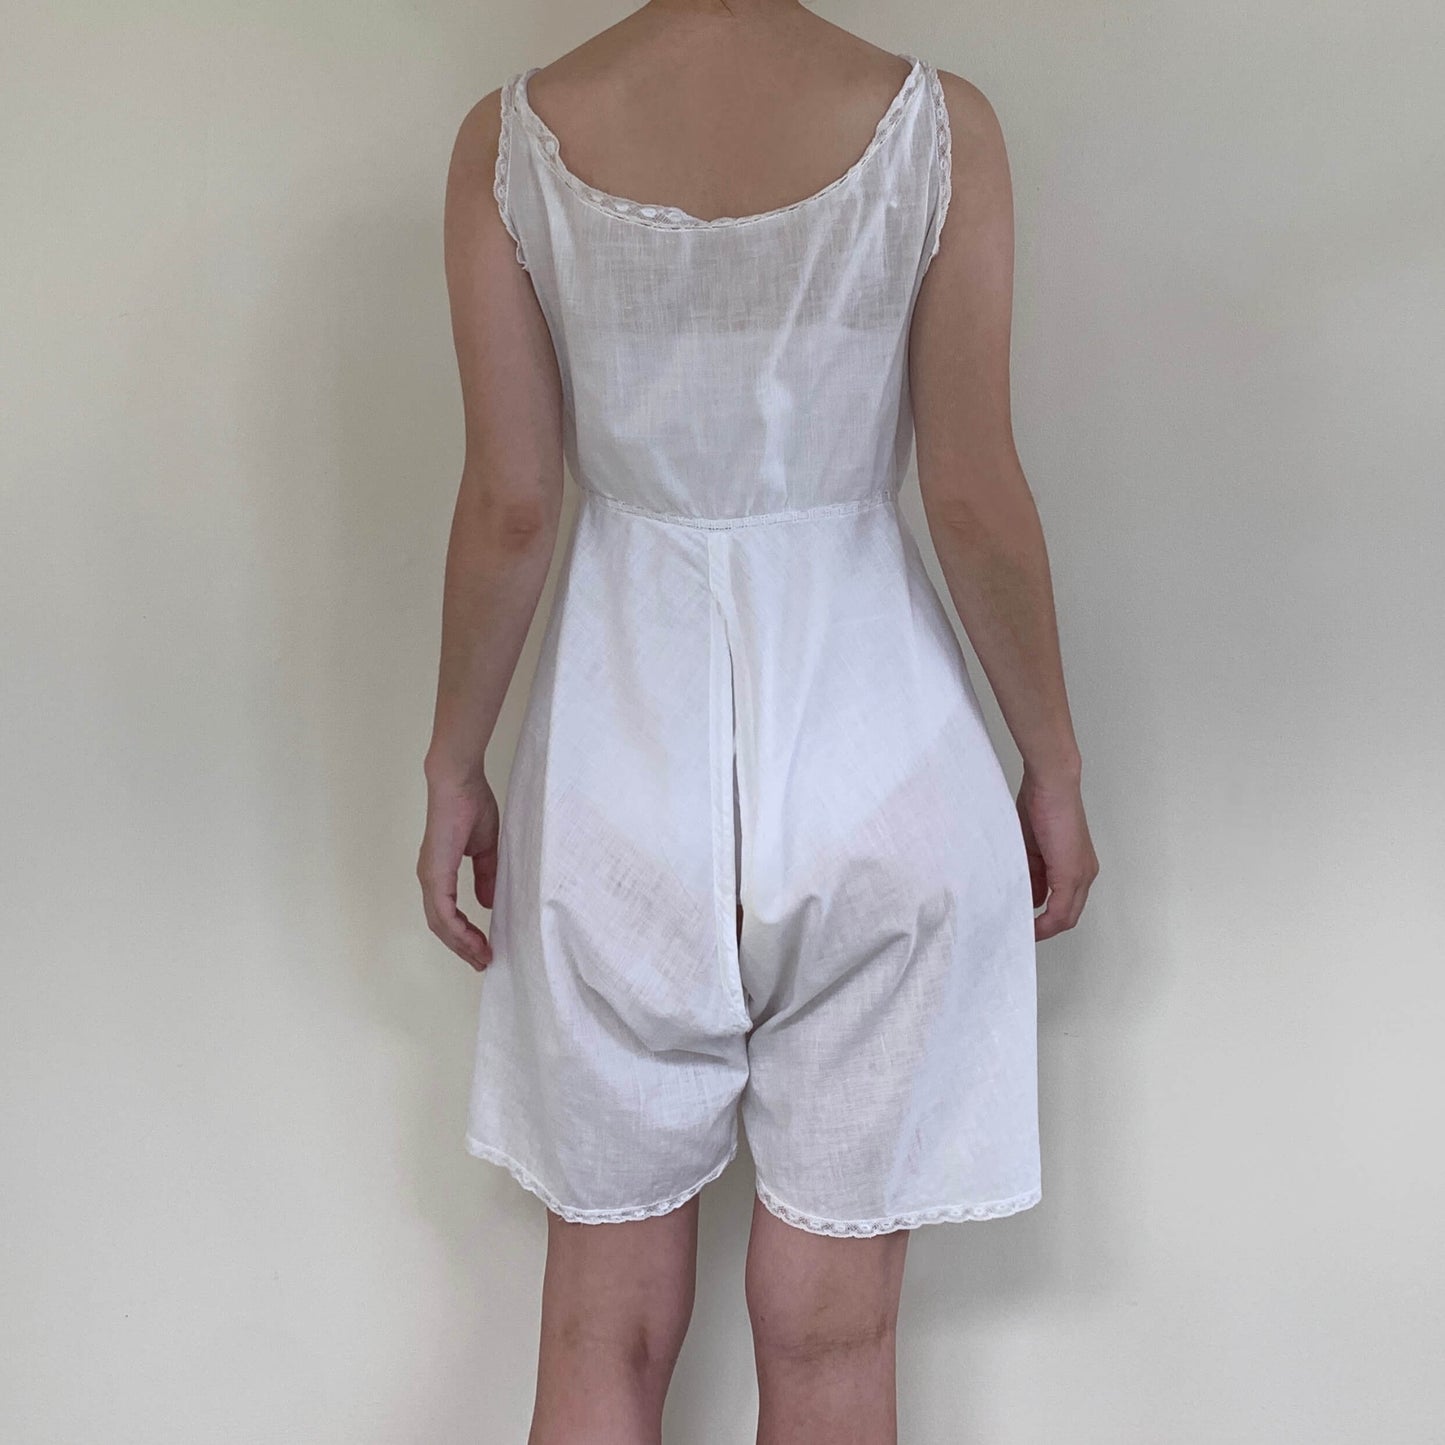 back view of the white chemise showing the split leg bloomers